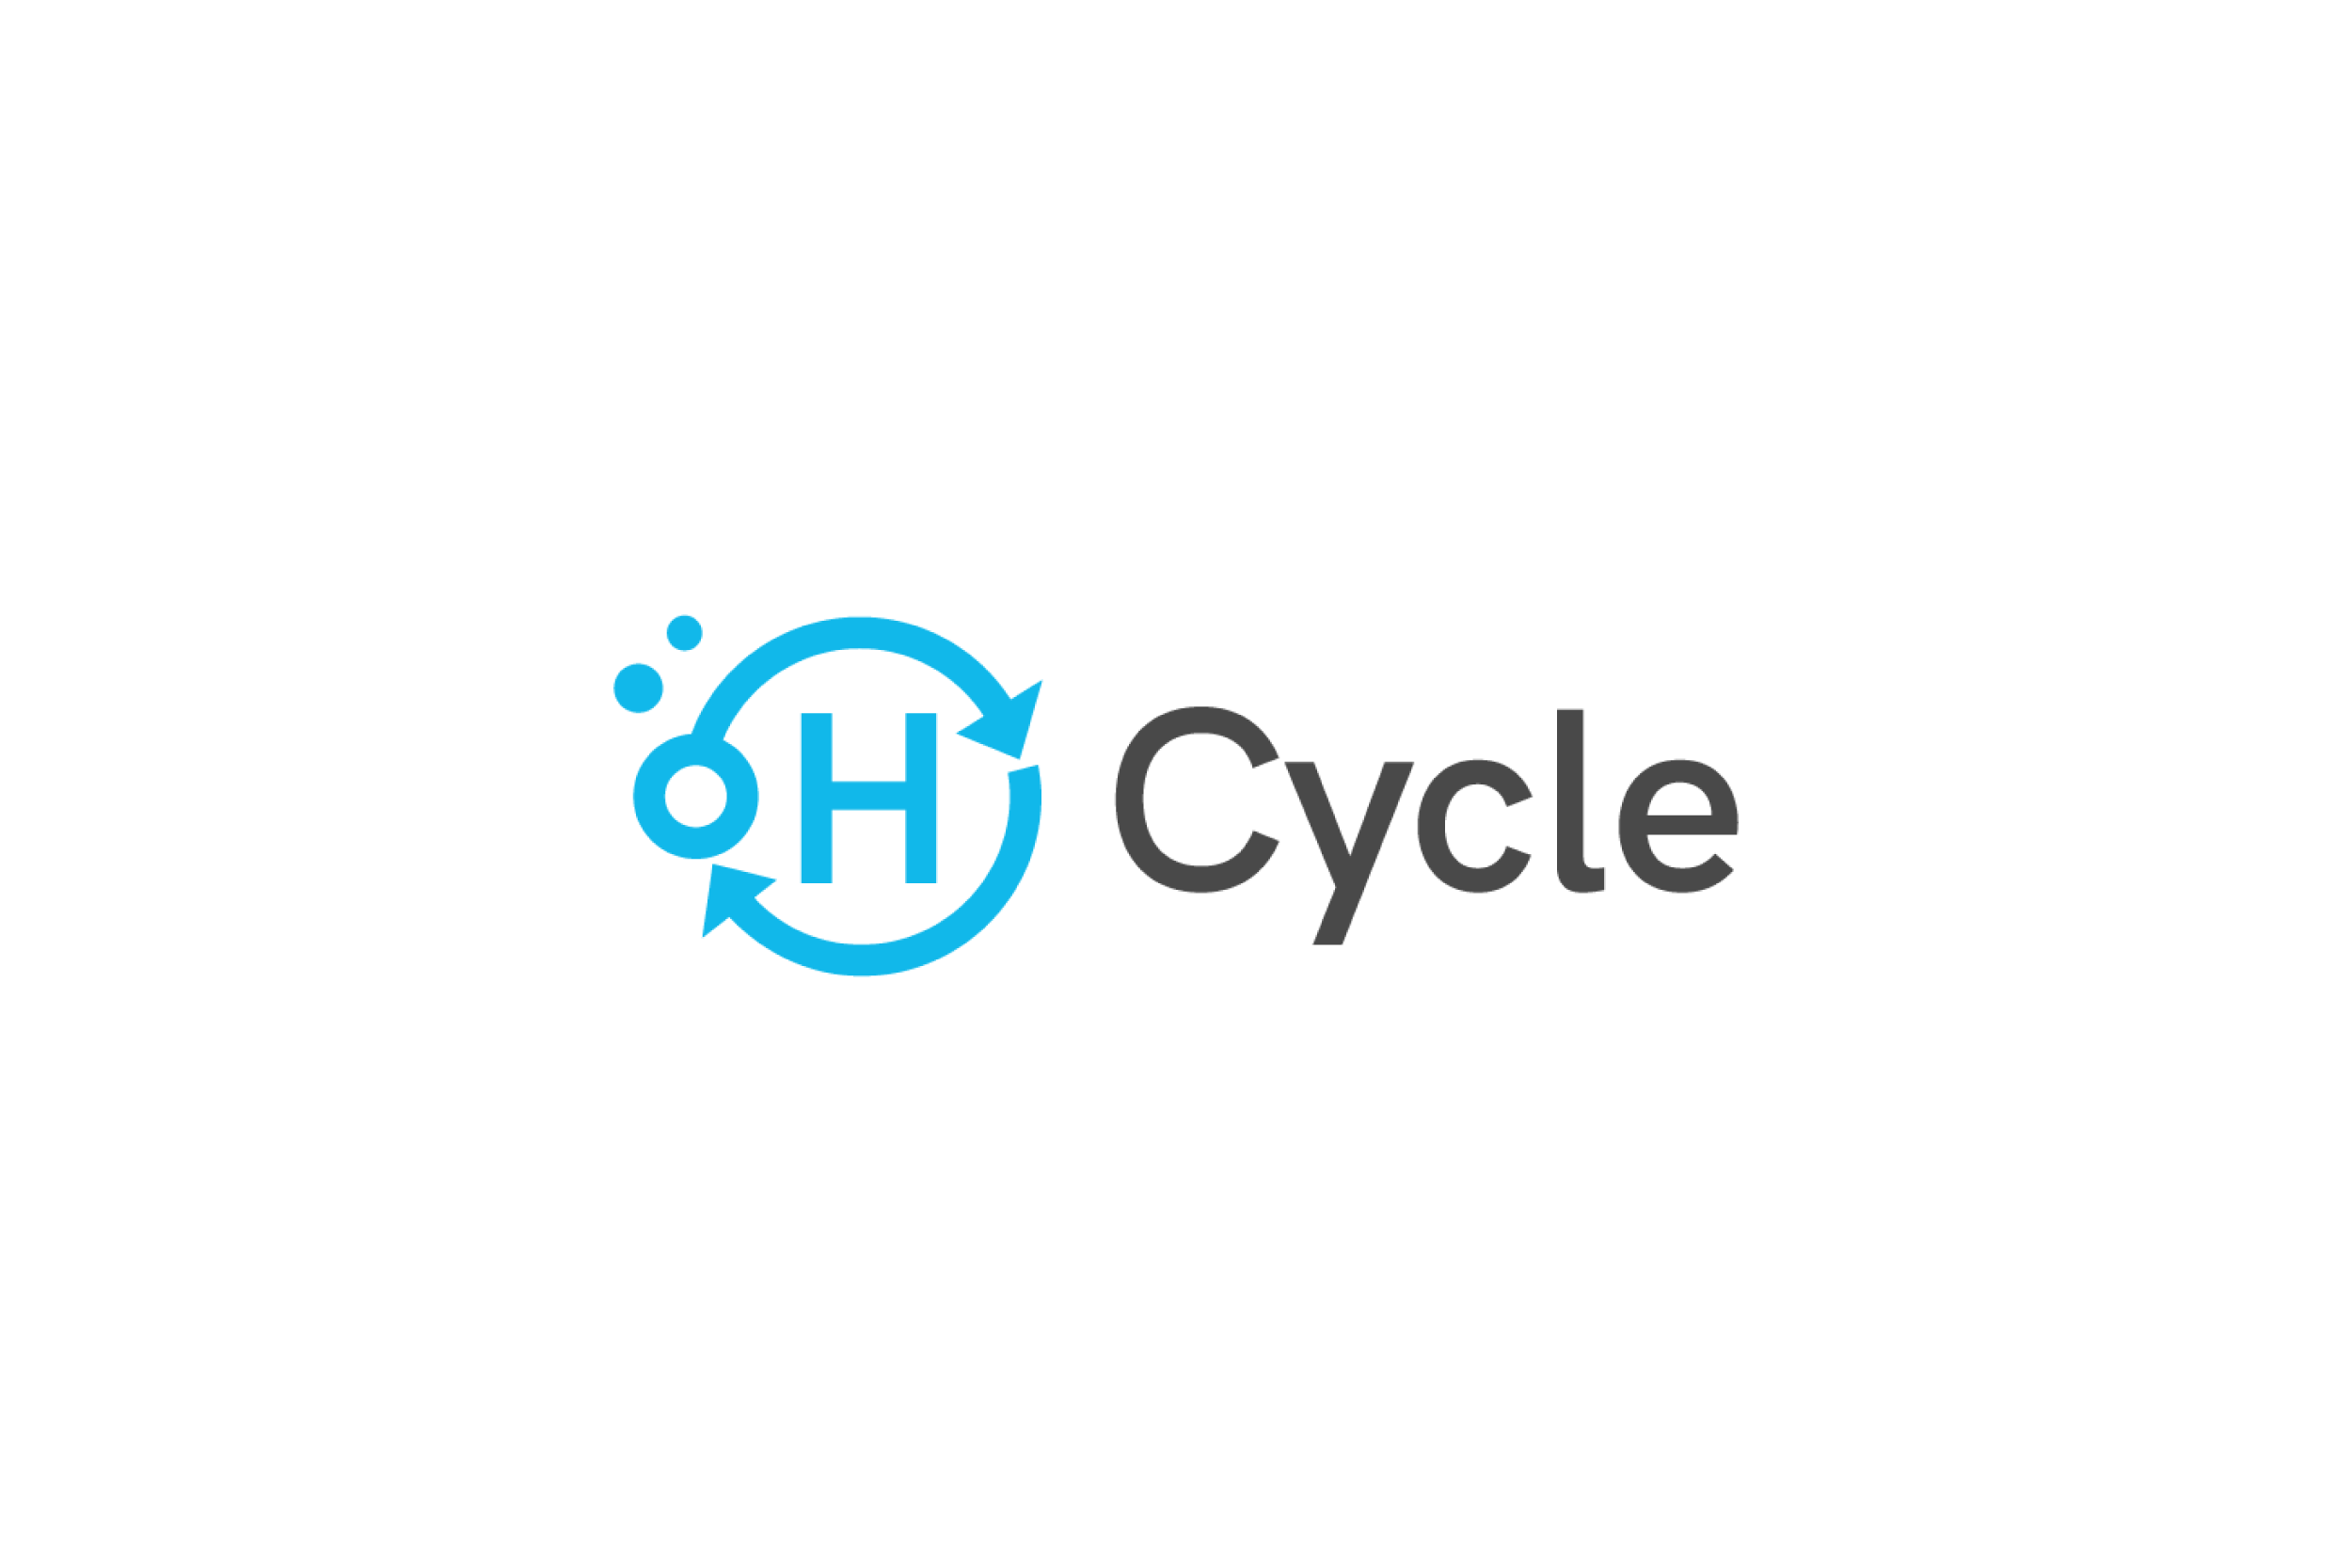 H Cycle